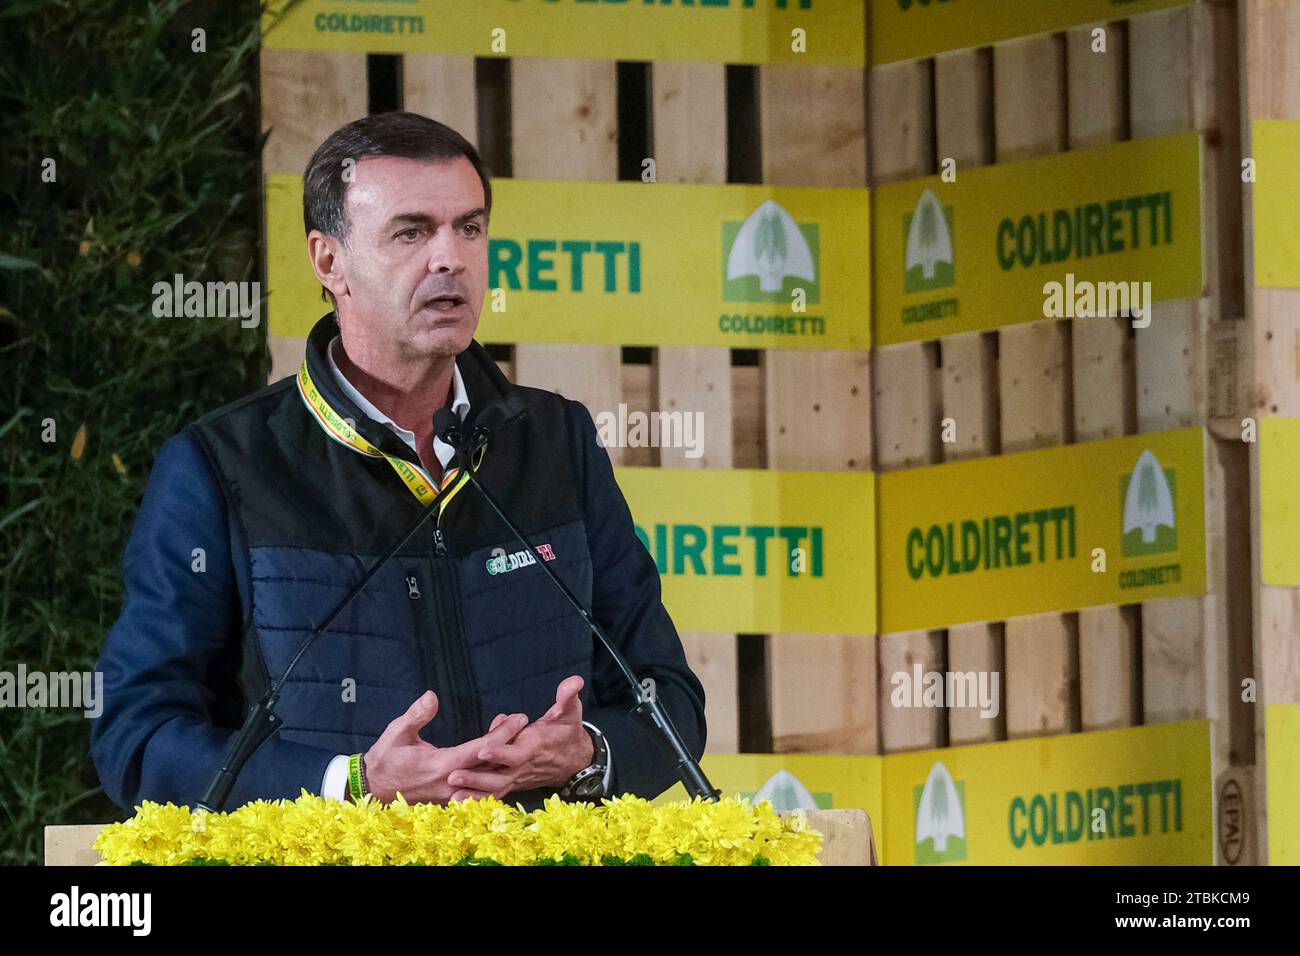 Ettore Prandini is Coldiretti's national president, spoke in Naples at the Coldiretti Village with more than 200 stands, including 100 with typical products of the land and other Italian specialties Stock Photo